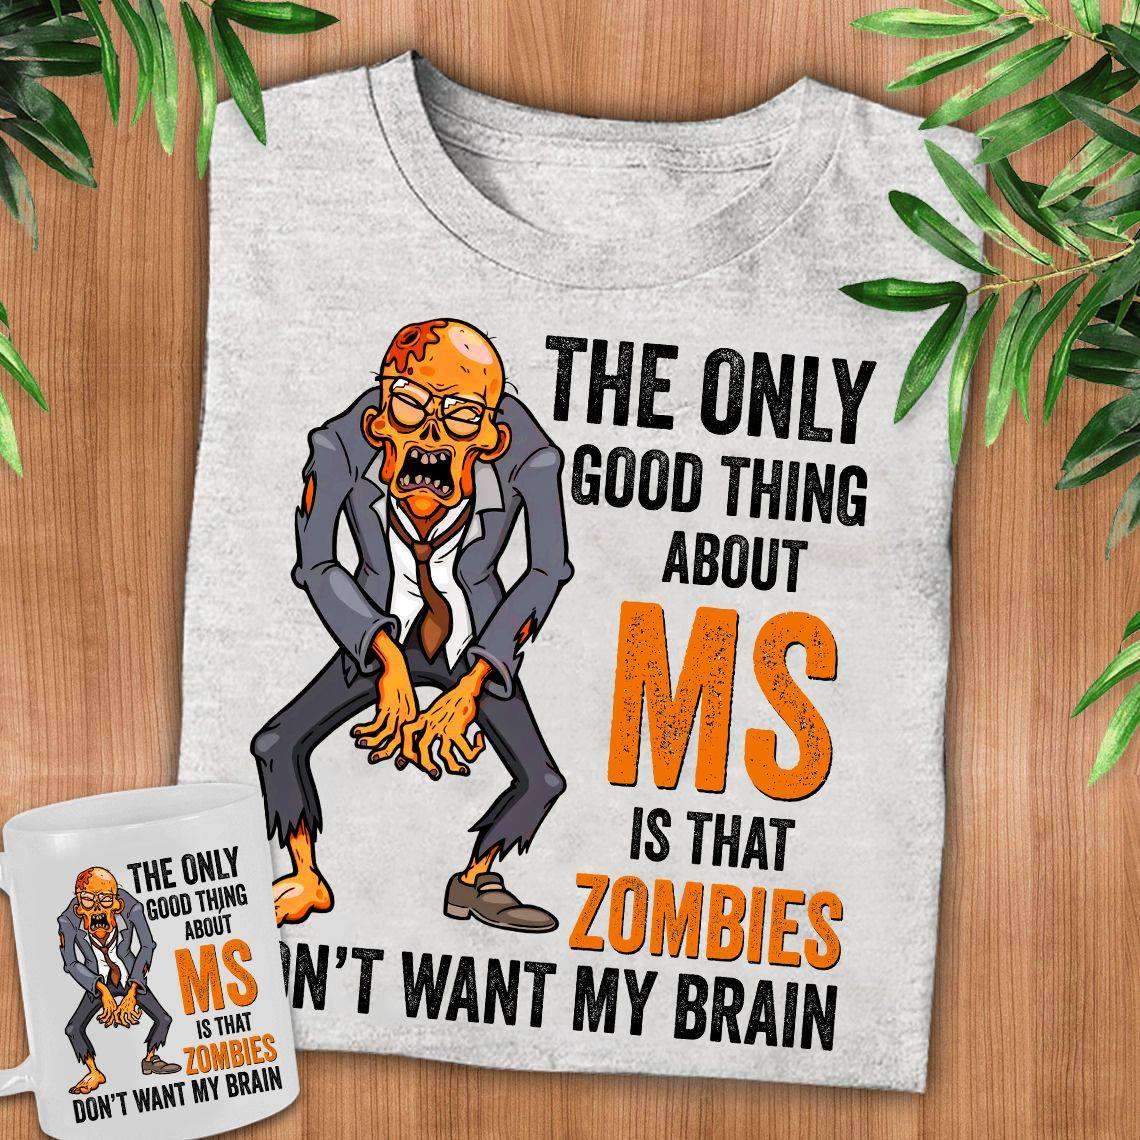 The only good thing about MS is that zombies don't want my brain - Grumpy zombies, multiple sclerosis awareness